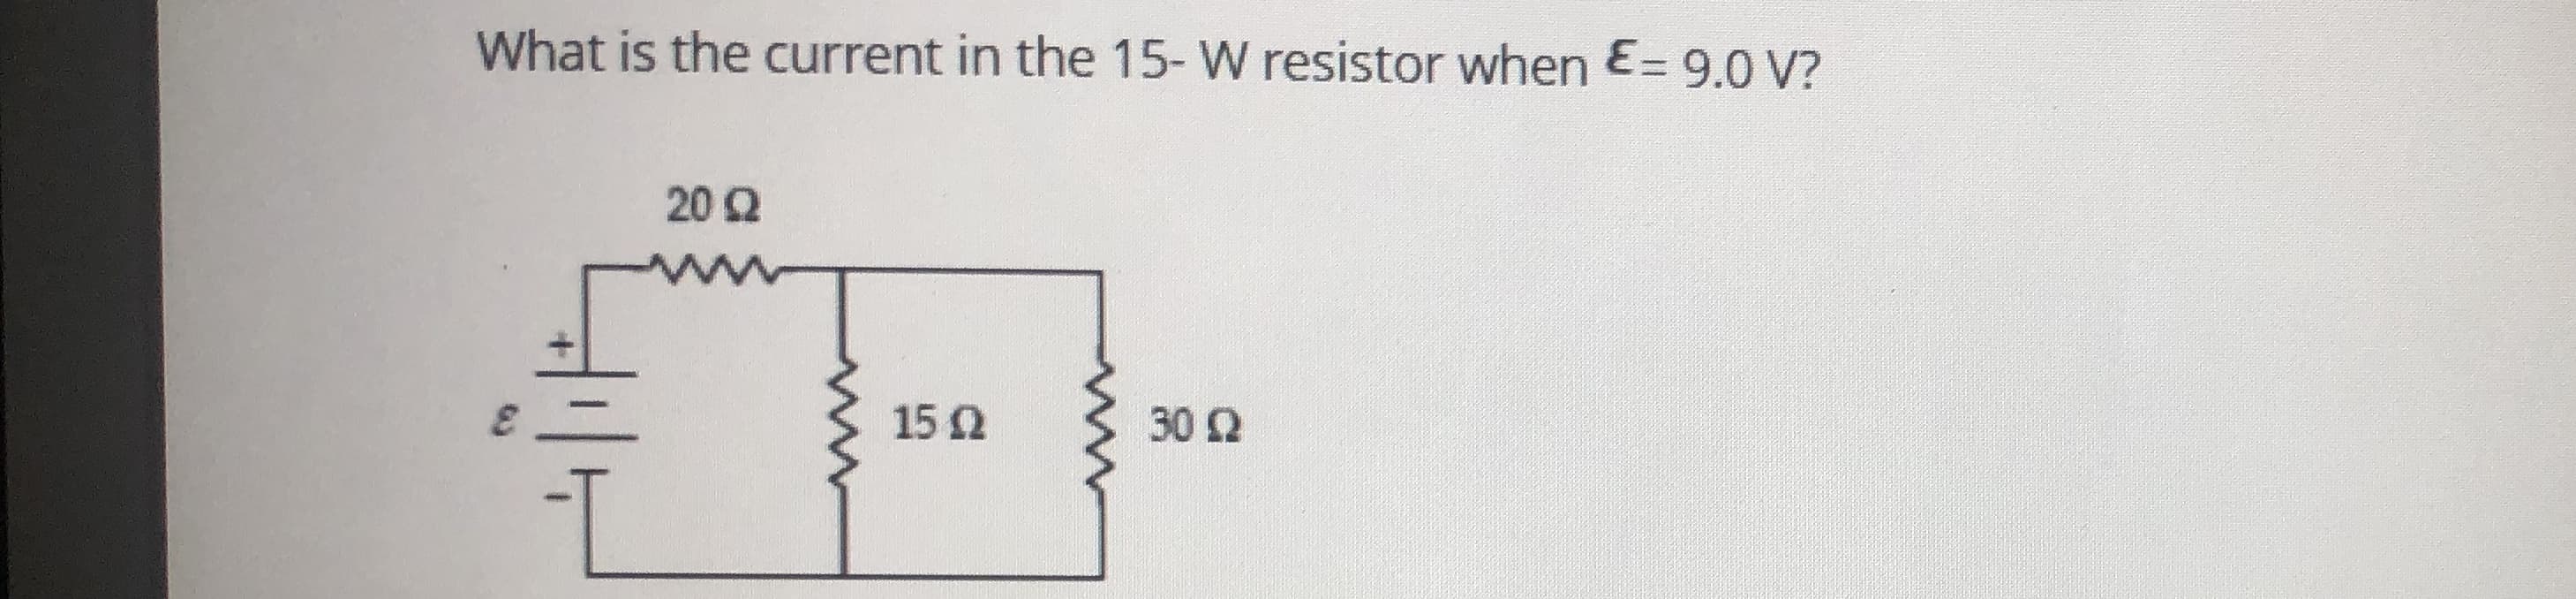 What is the current in the 15- W resistor when E= 9.0 V?
20 2
15 2
30 2
